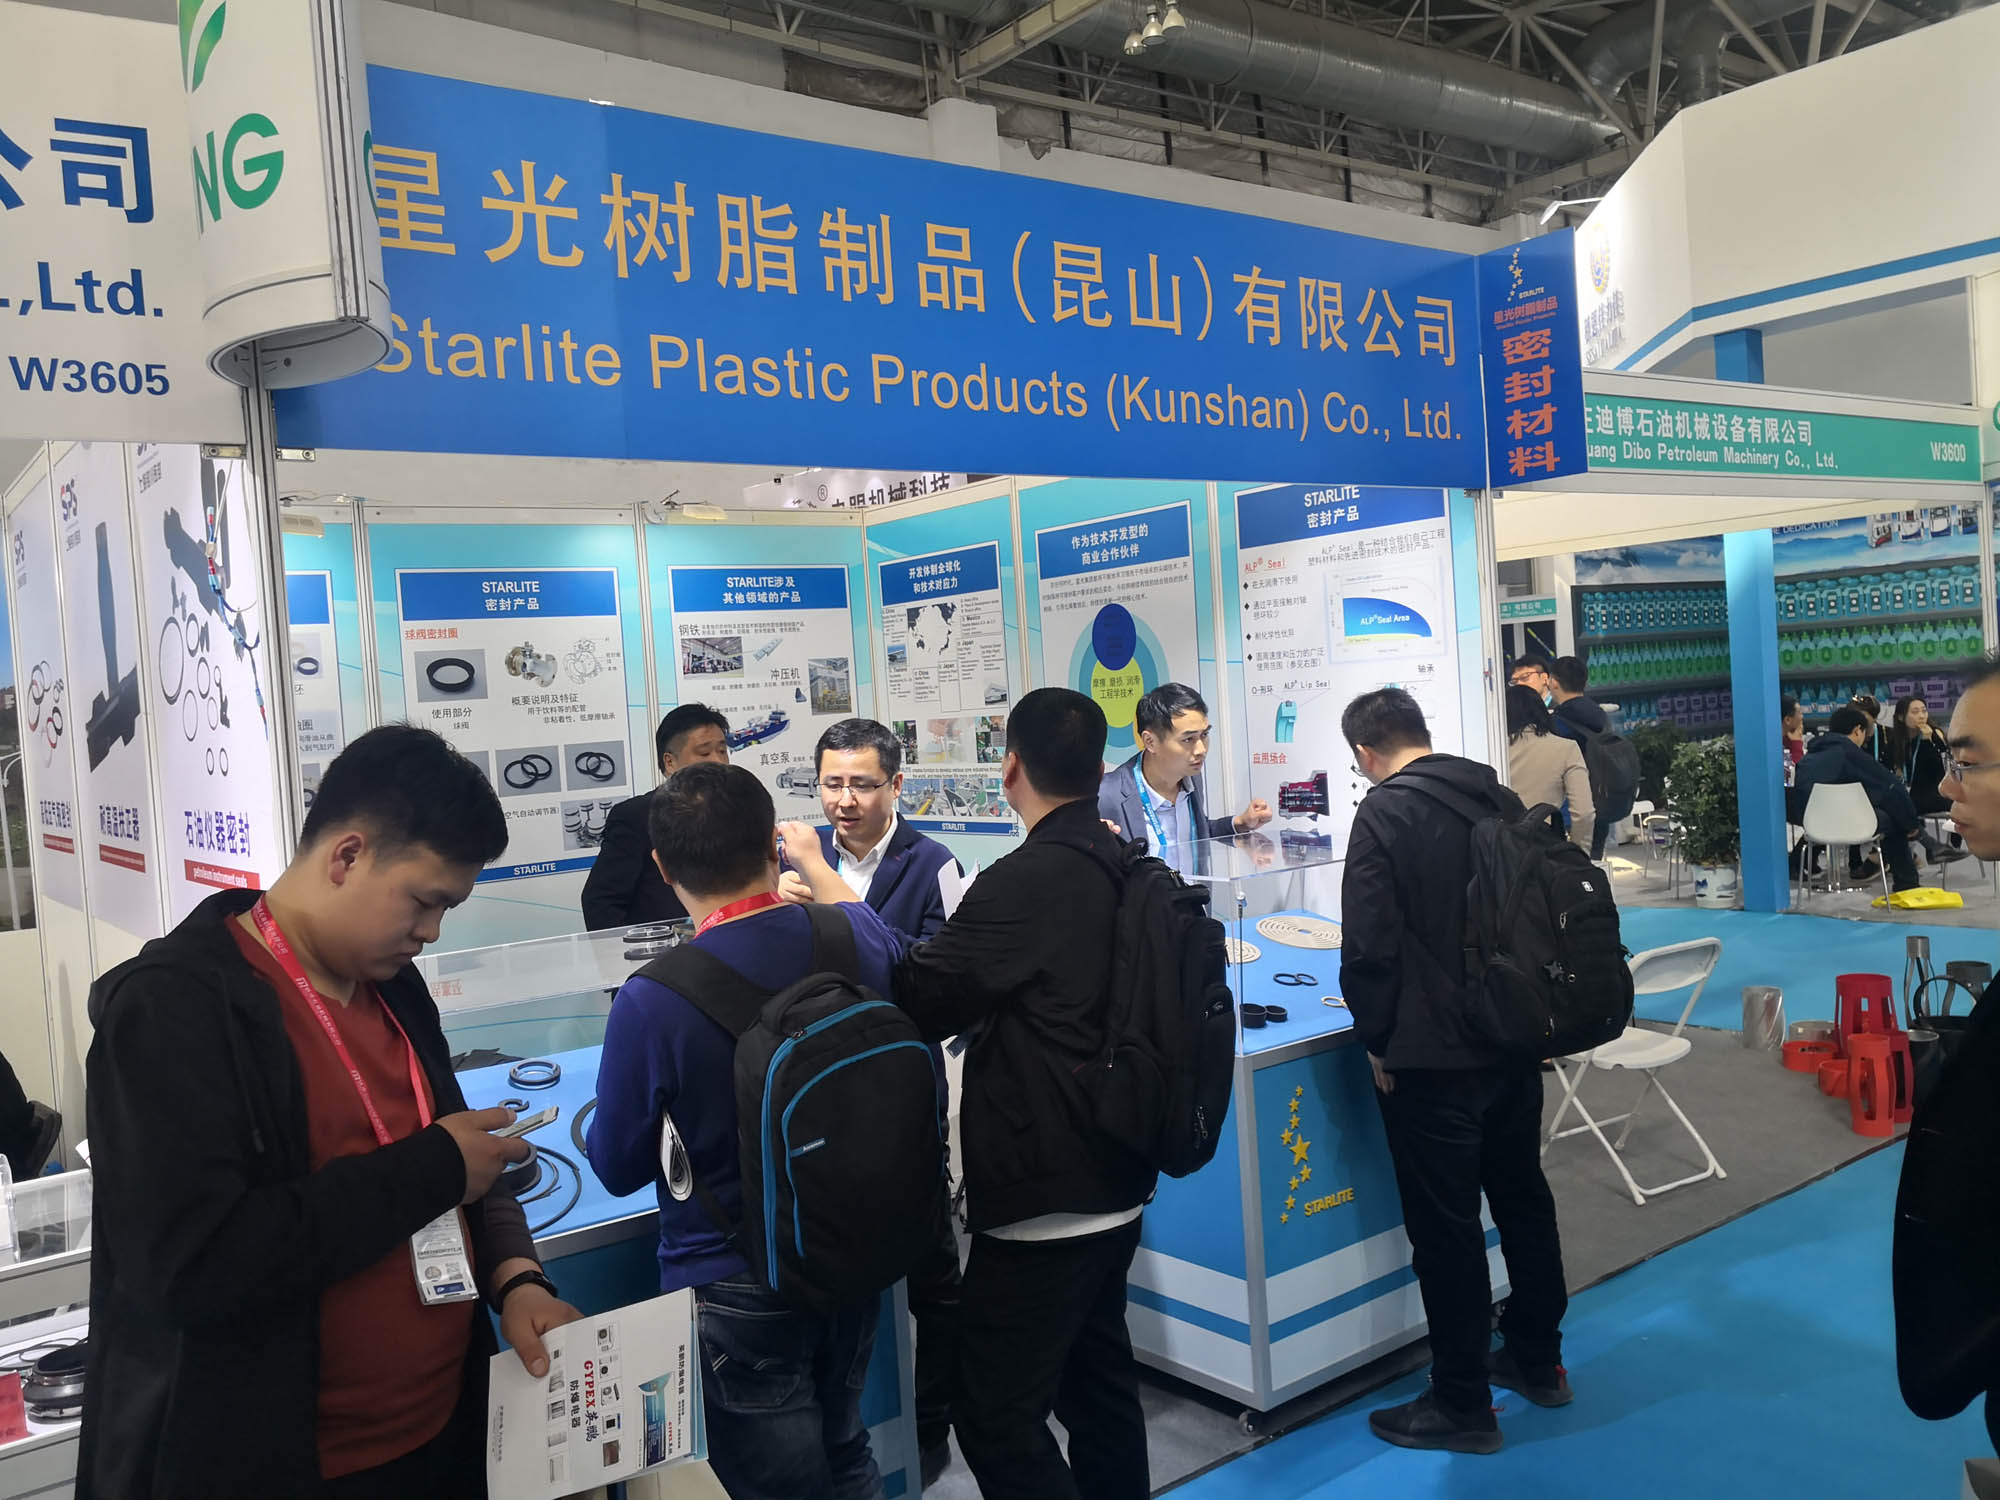 The 19th China International Petroleum & Petrochemical Technology and Equipment Exhibition